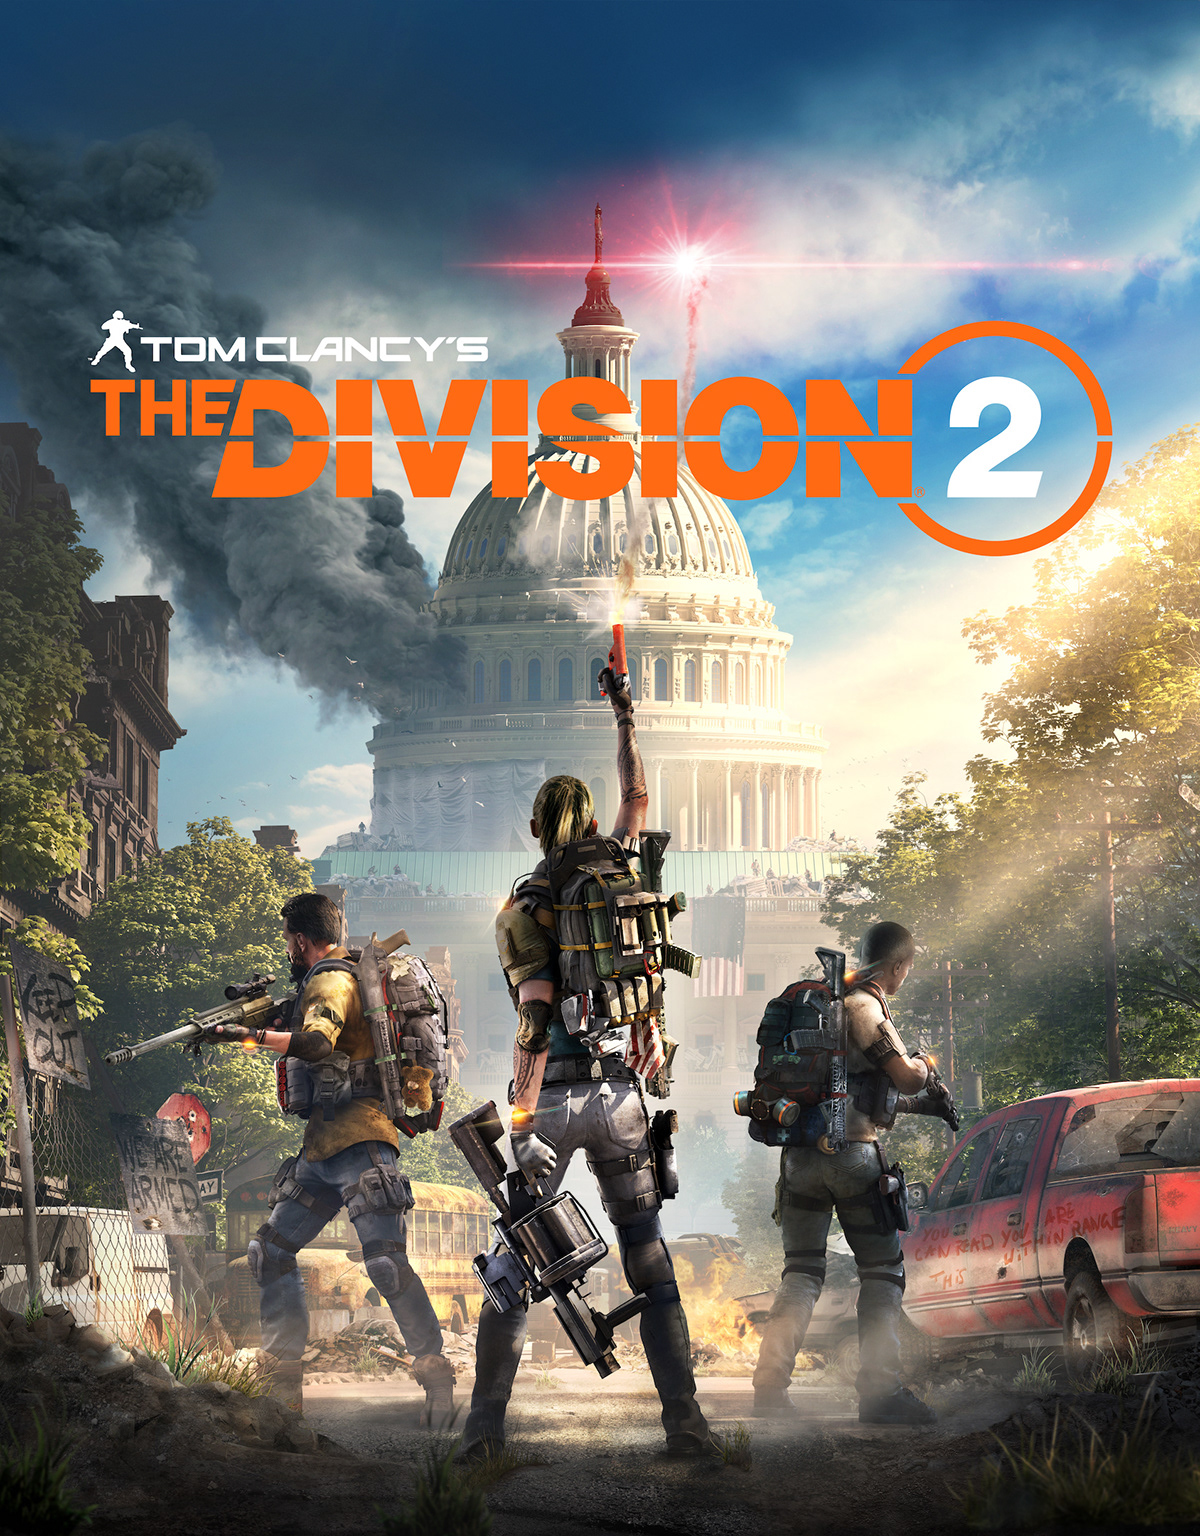 the division Washington D.C. Post Apocalyptic Capitol united states Matte Painting Street video game soldier